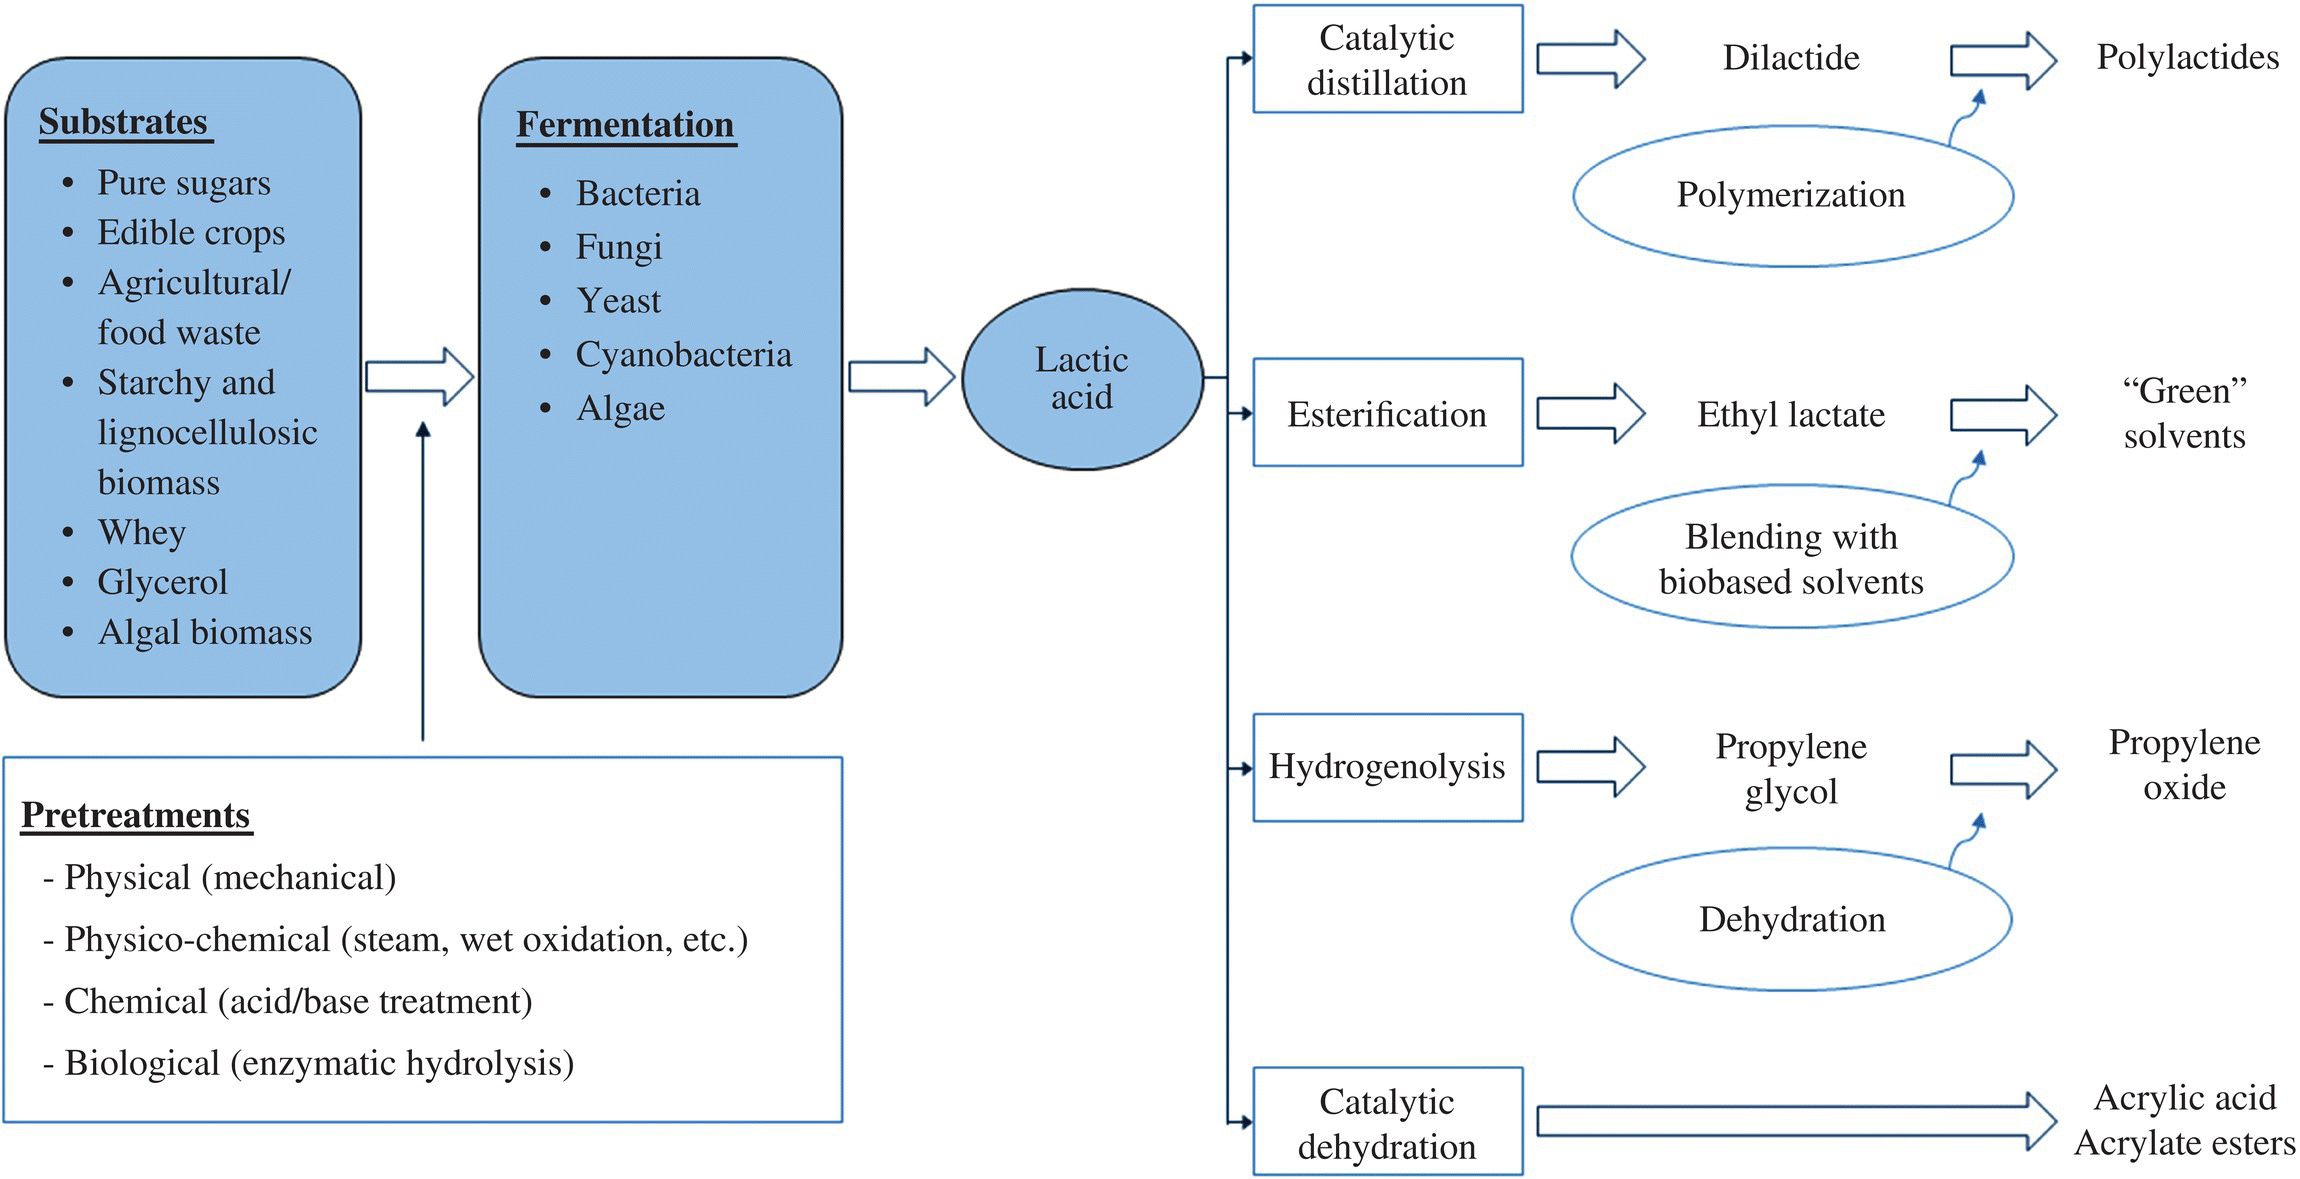 Flow of lactic acid production by microbial fermentation and its derivatives from substrates to fermentation to lactic acid to catalytic distillation, esterification, hydrogenolysis, and catalytic dehydration.